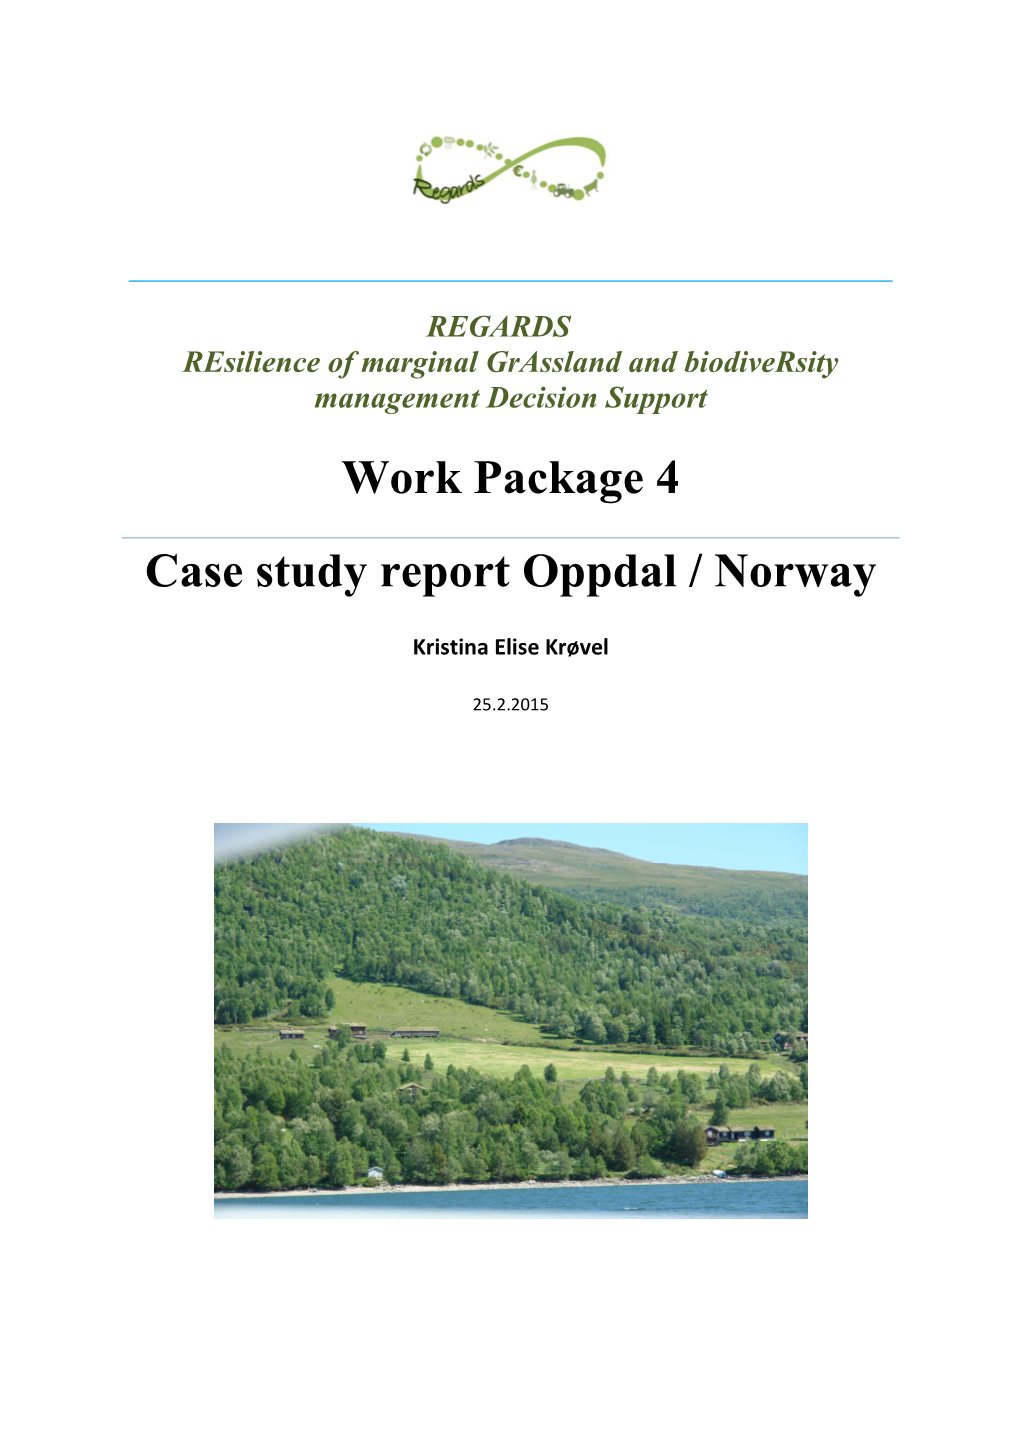 Case Study Report Oppdal / Norway